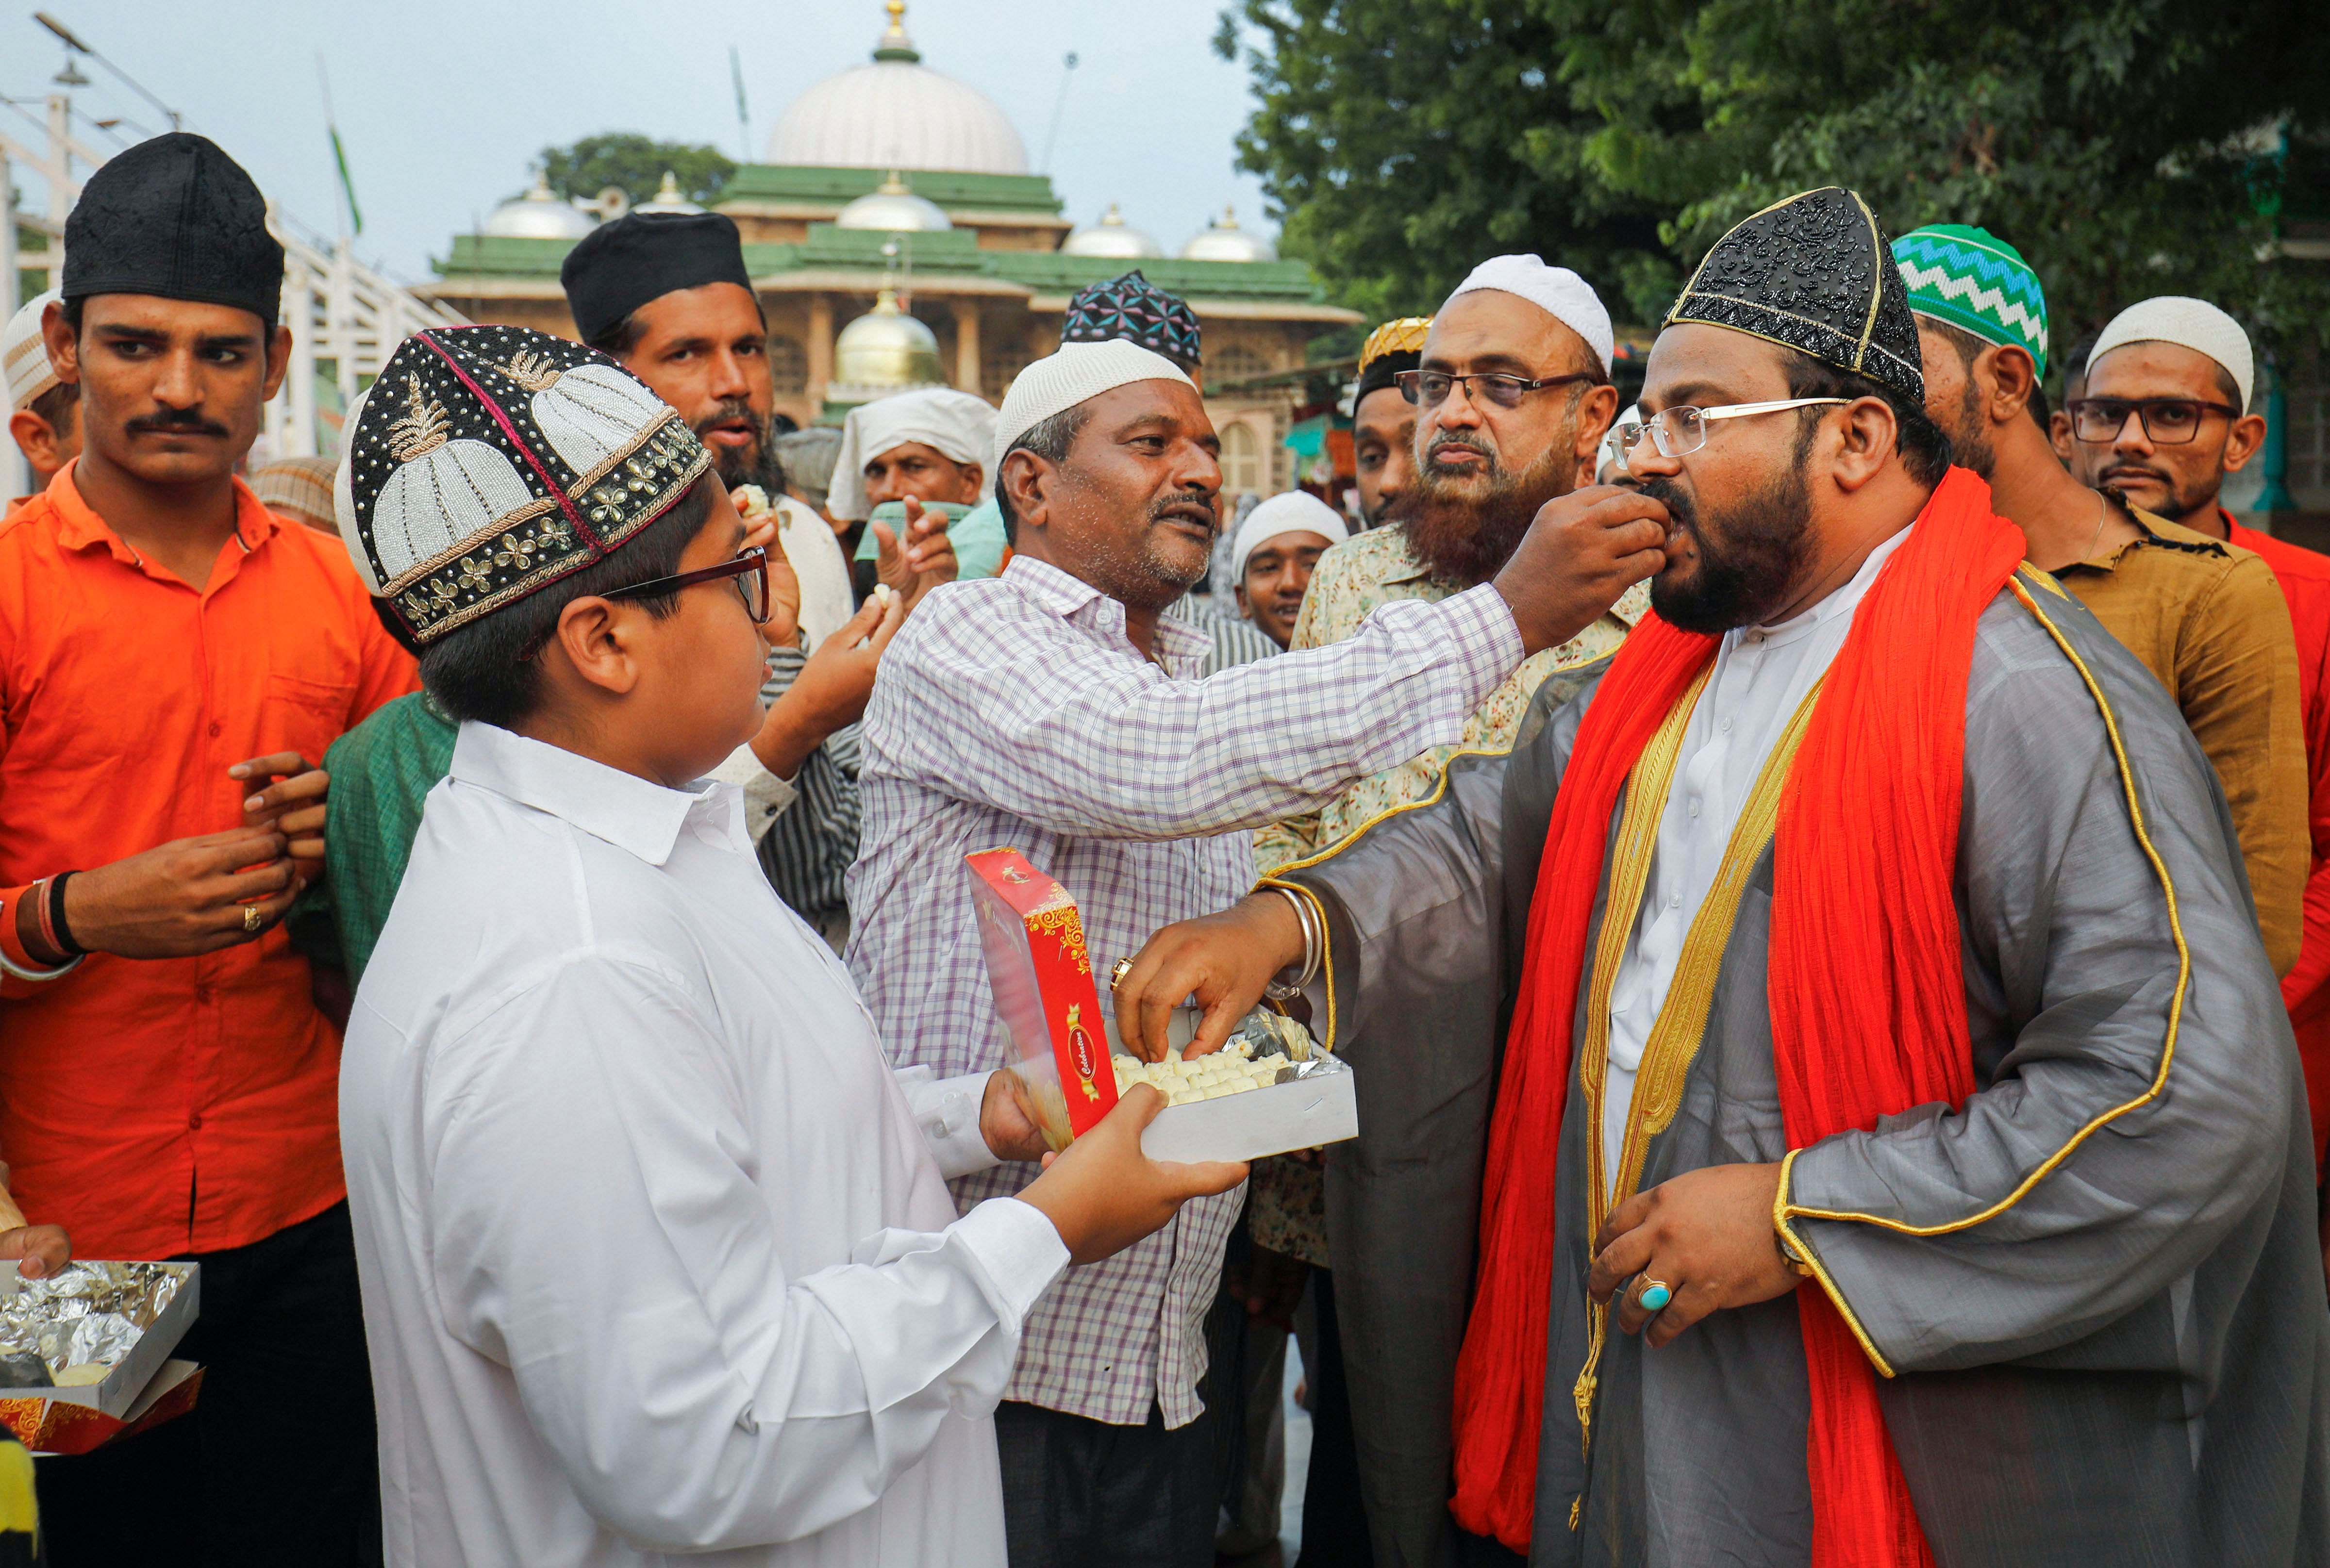 Muslims offer sweets to each other after Supreme Court's verdict outside the Shah-e-alam shrine in Ahmedabad, India, Saturday, Nov. 9, 2019. The apex court on Saturday cleared the way for the construction of a Ram Temple at the disputed site at Ayodhya, and directed the Centre to allot a 5-acre plot to the Sunni Waqf Board for building a mosque. (PTI Photo)